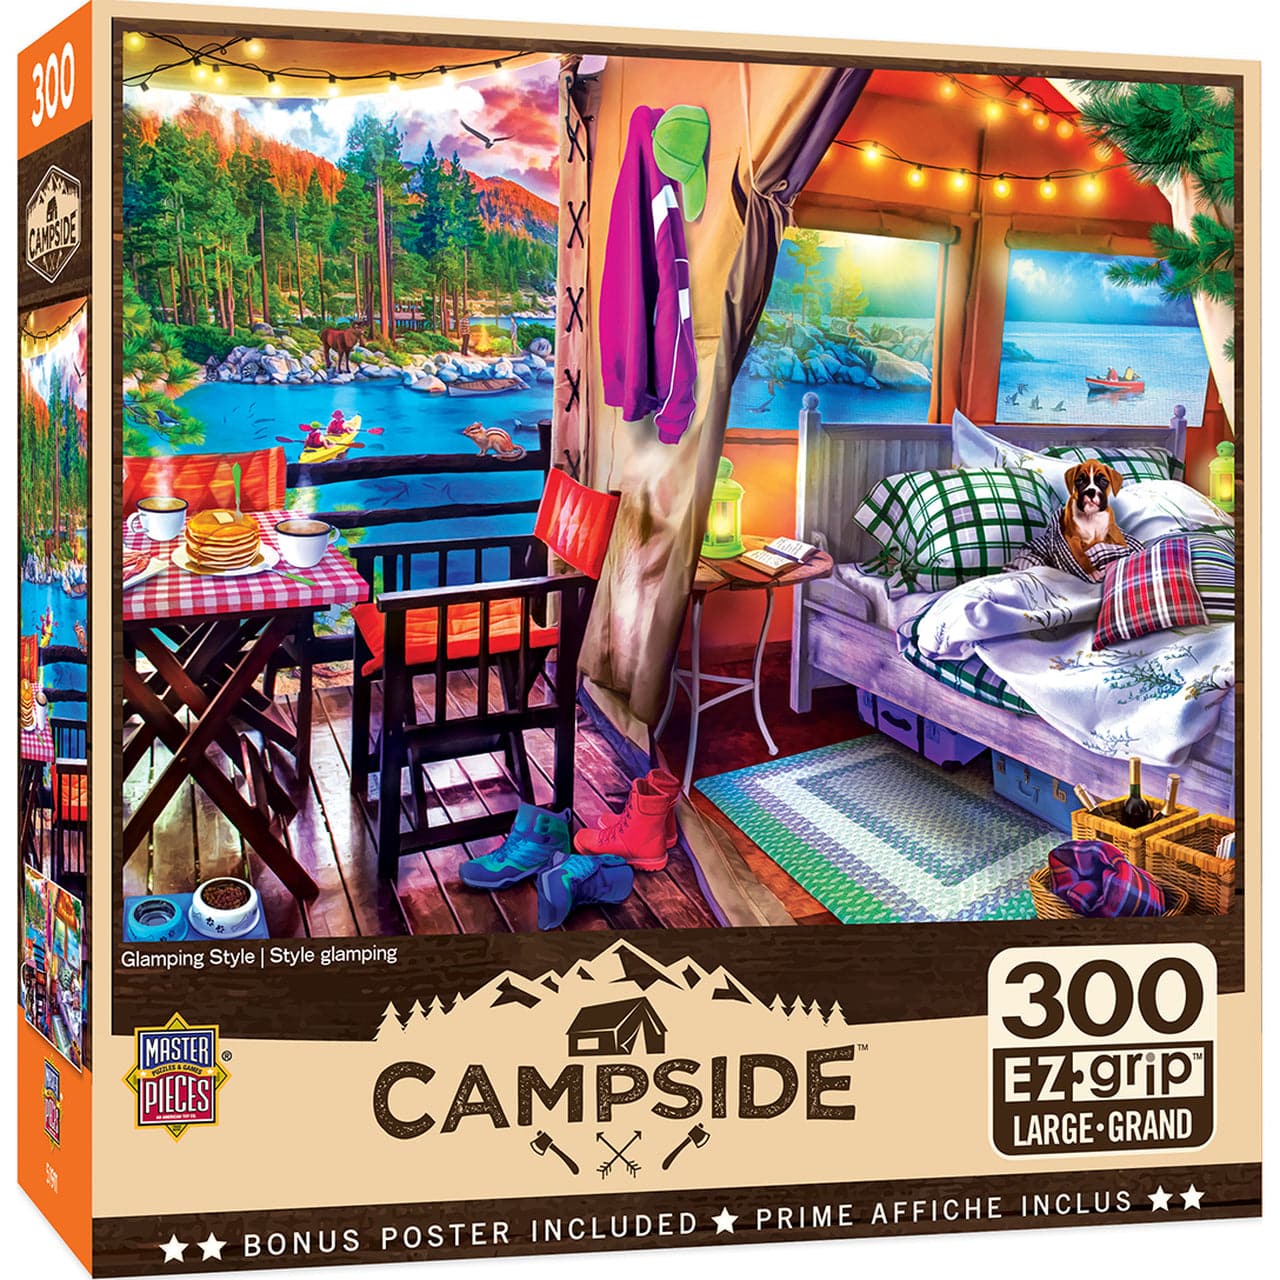 MasterPieces-Campside - Glamping Style - 300 Piece EzGrip Puzzle-32182-Legacy Toys